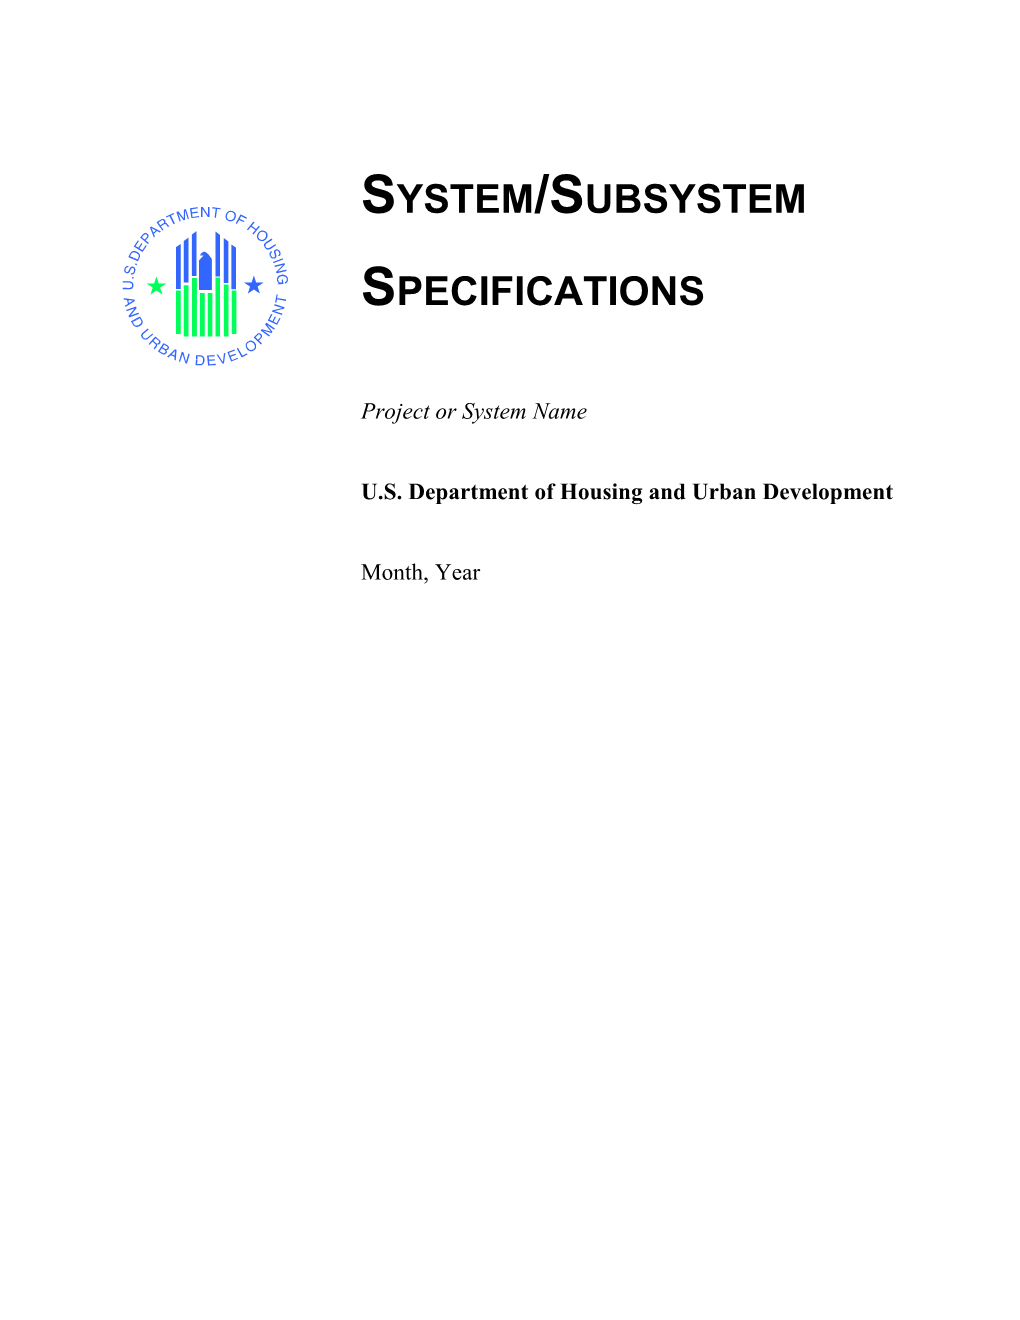 System/Subsystem Specifications